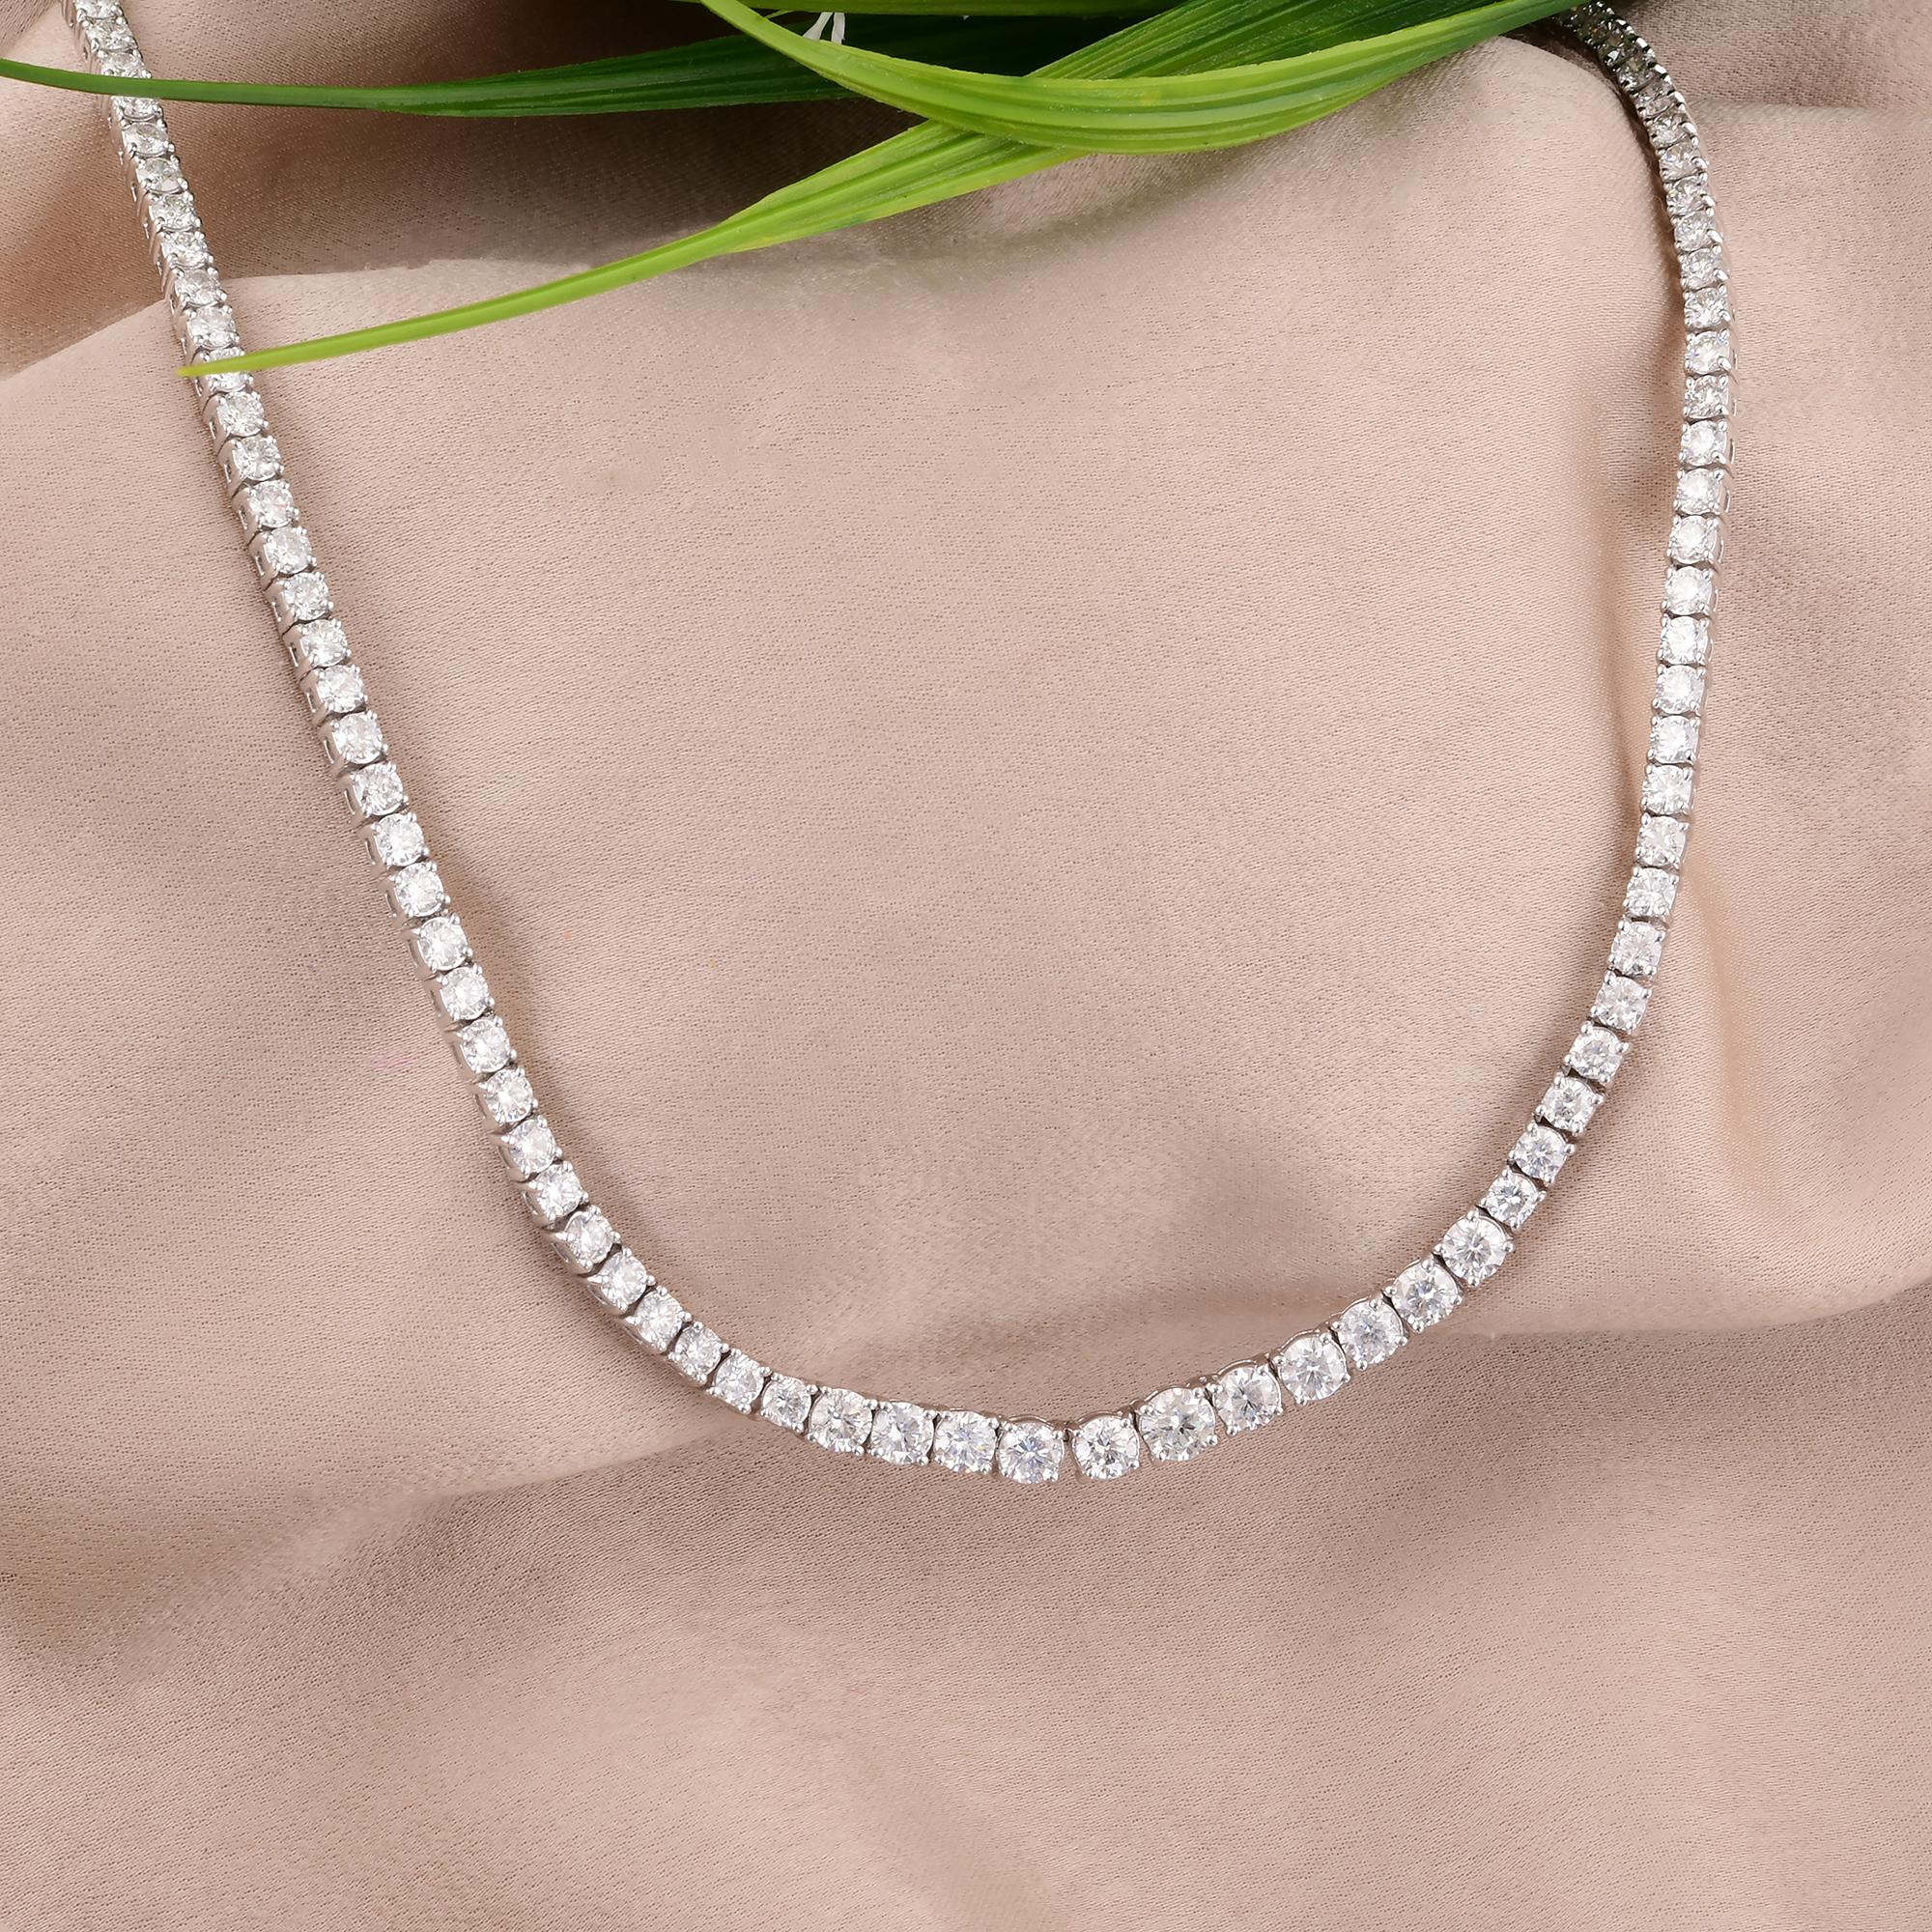 The delicate 18 Karat White Gold chain gracefully enhances the luminosity of the diamonds, creating a harmonious union of luxury and refinement. Expertly crafted with precision and attention to detail, every aspect of this necklace exudes elegance